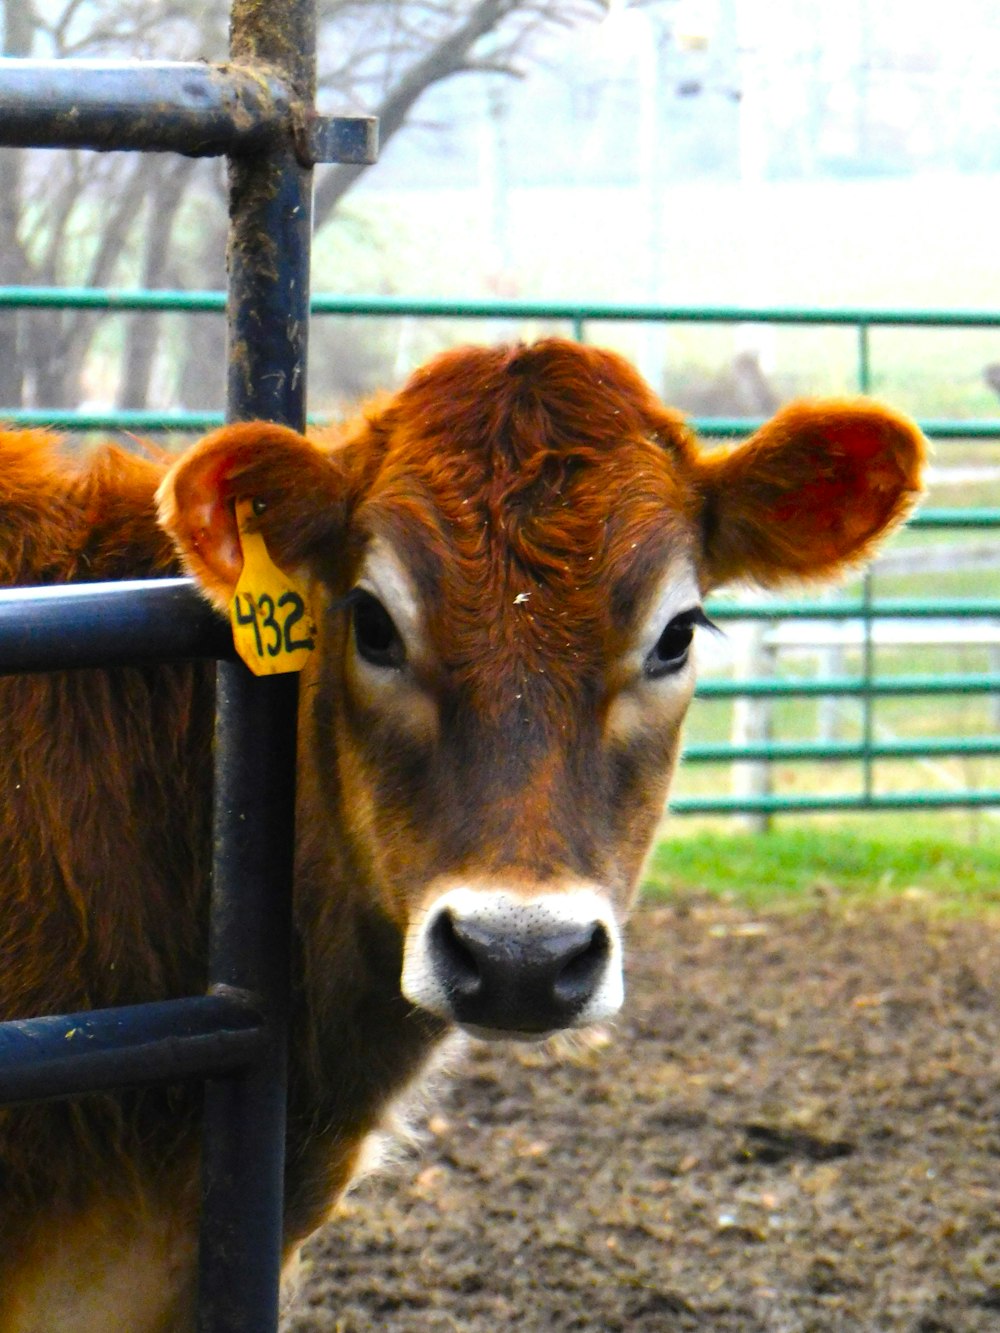 a close up of a cow behind a fence